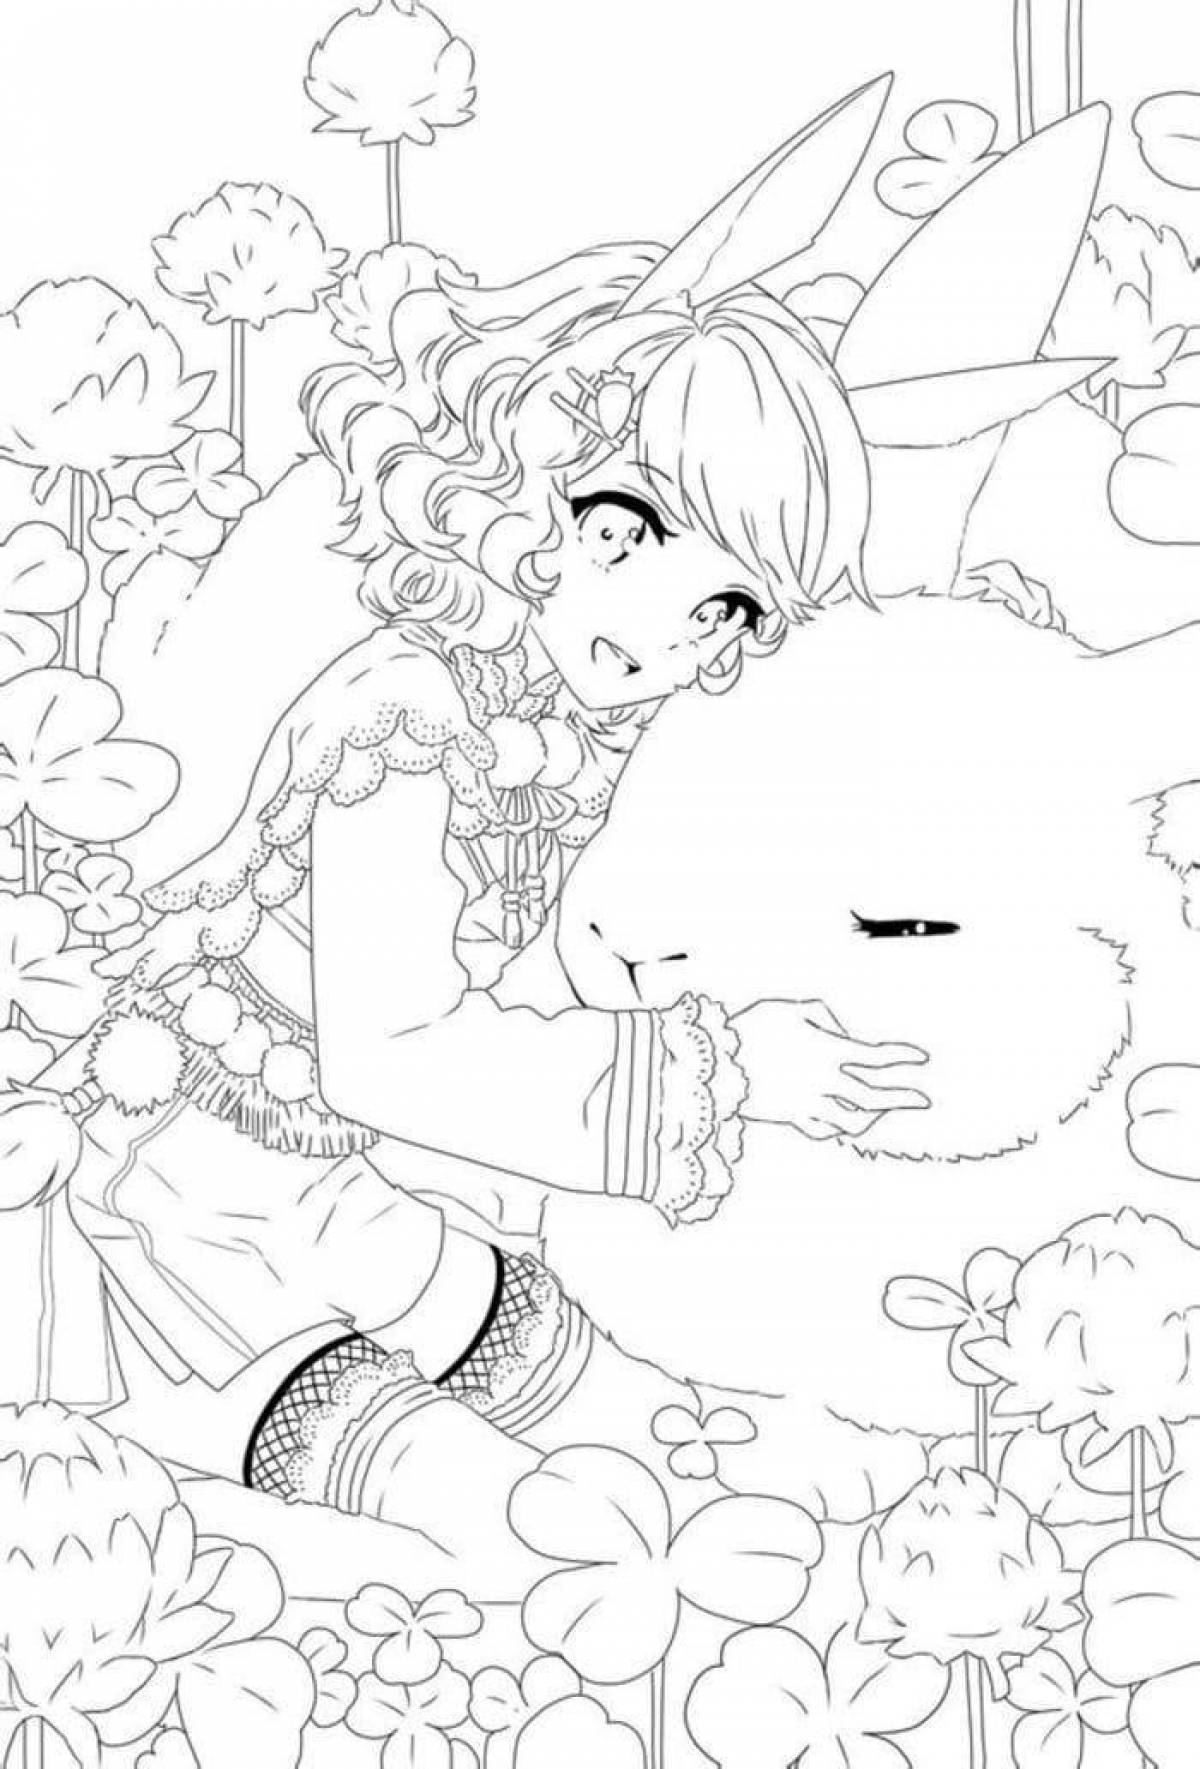 Fascinating anime complex coloring book